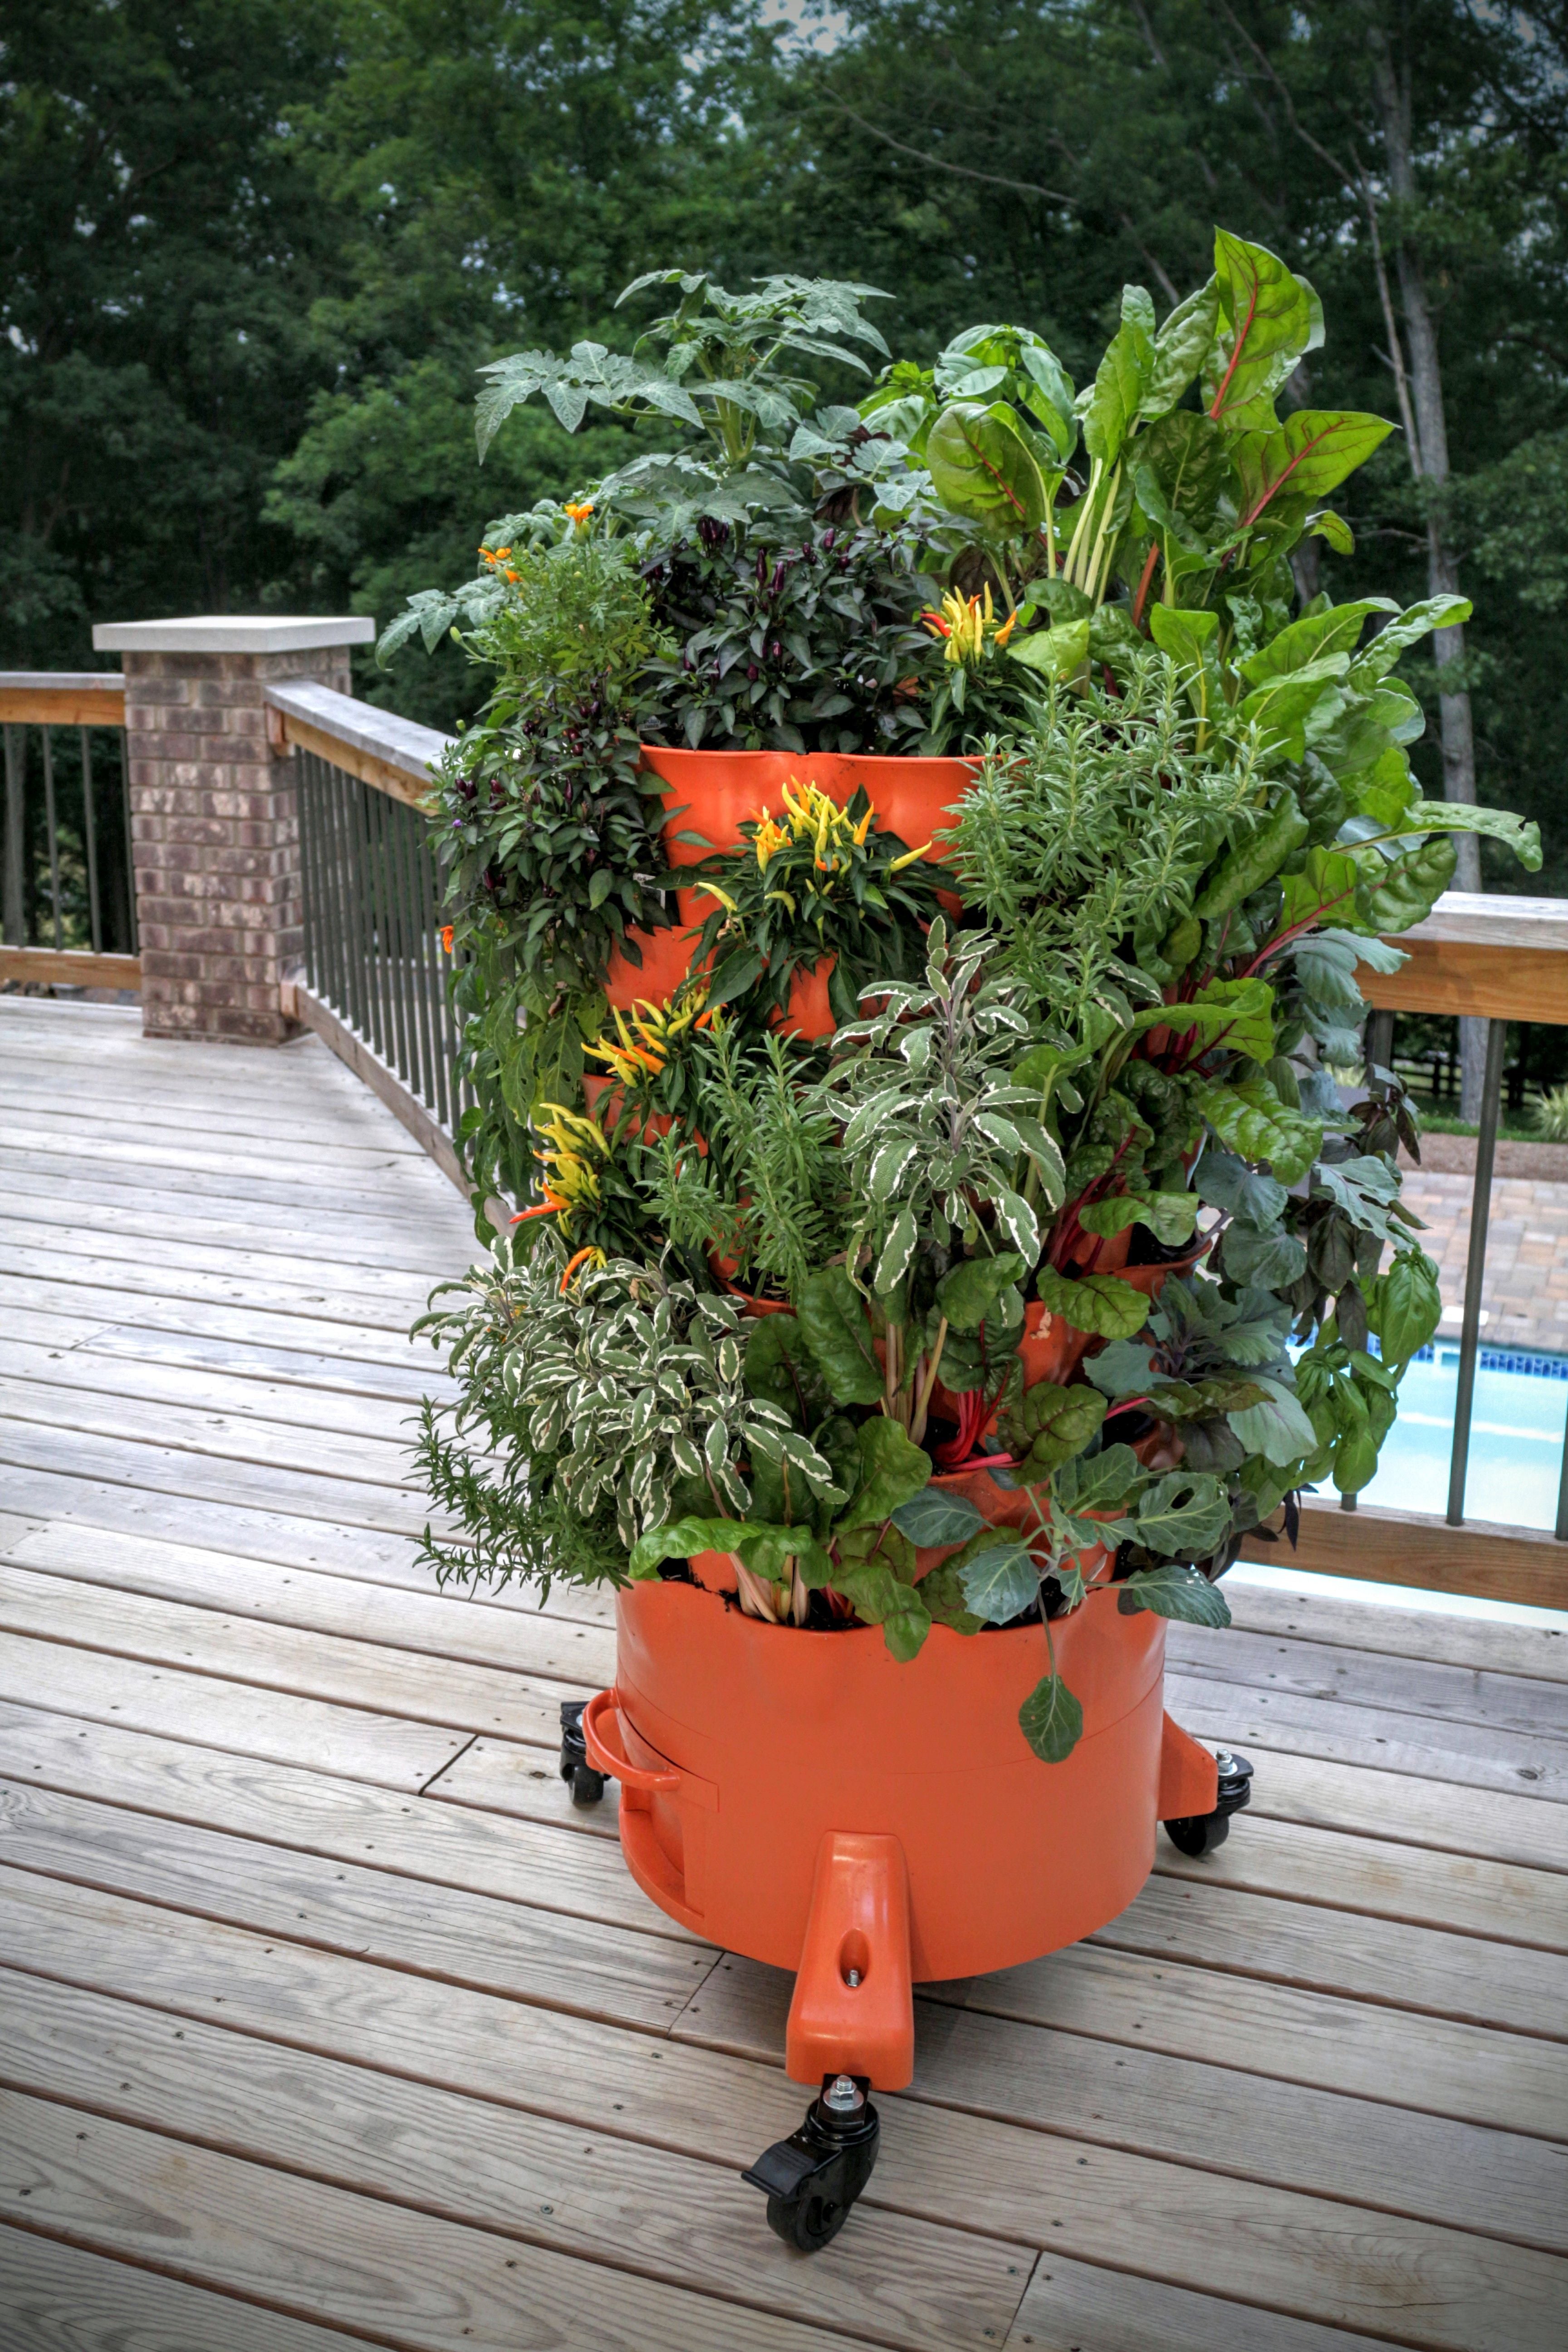 Vertical Garden Planters: 8 Planters That Maximize Space and Look Great